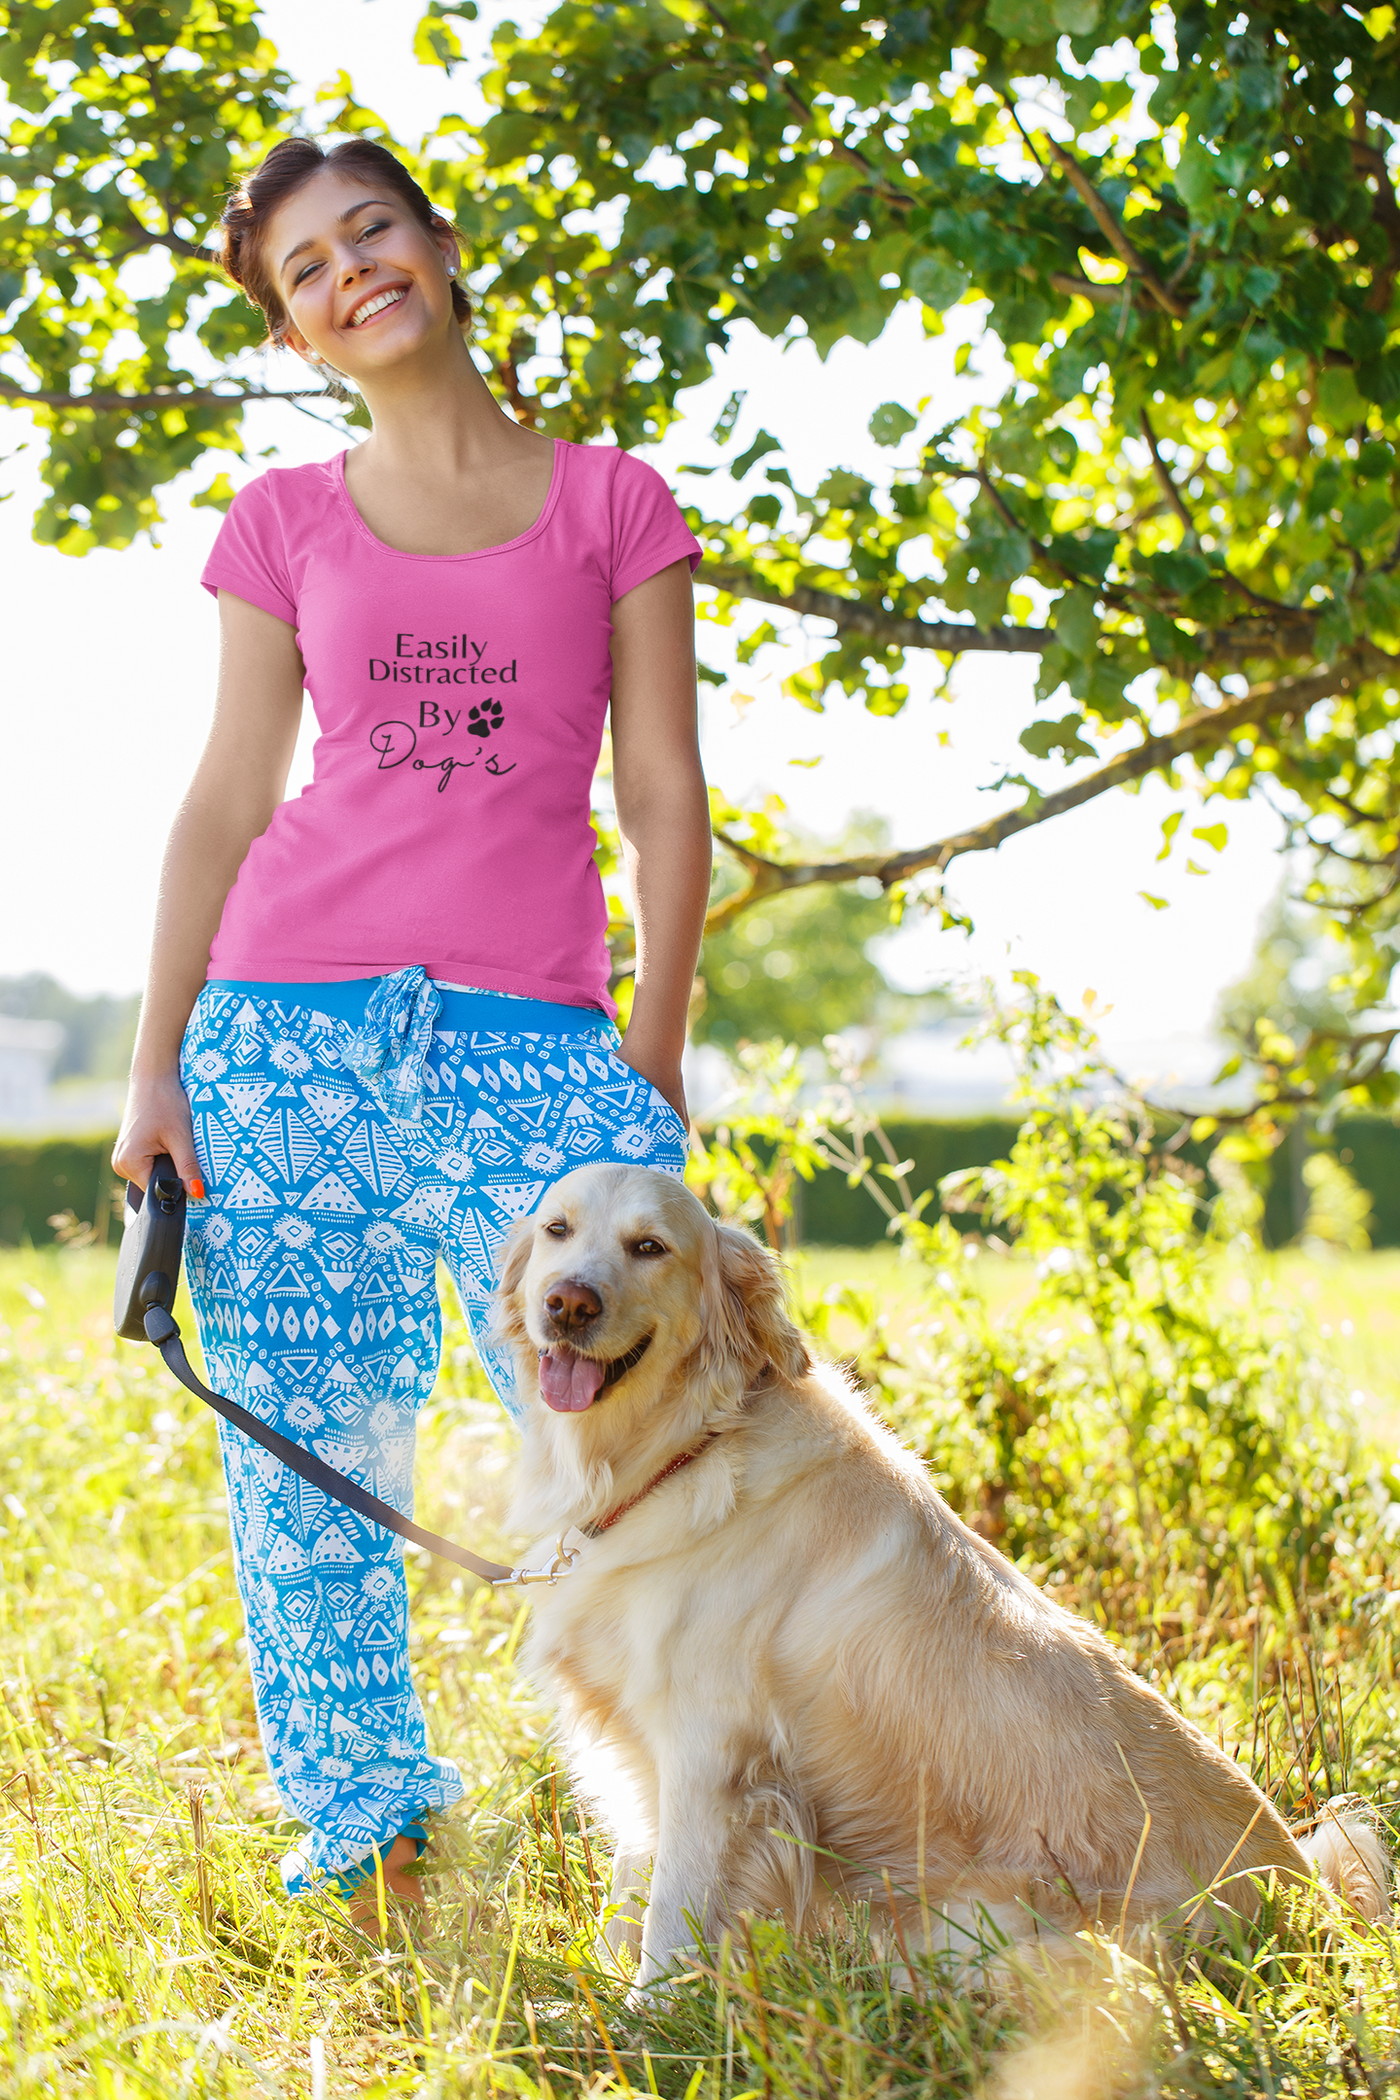 Easily Distracted by dogs Women's Tee